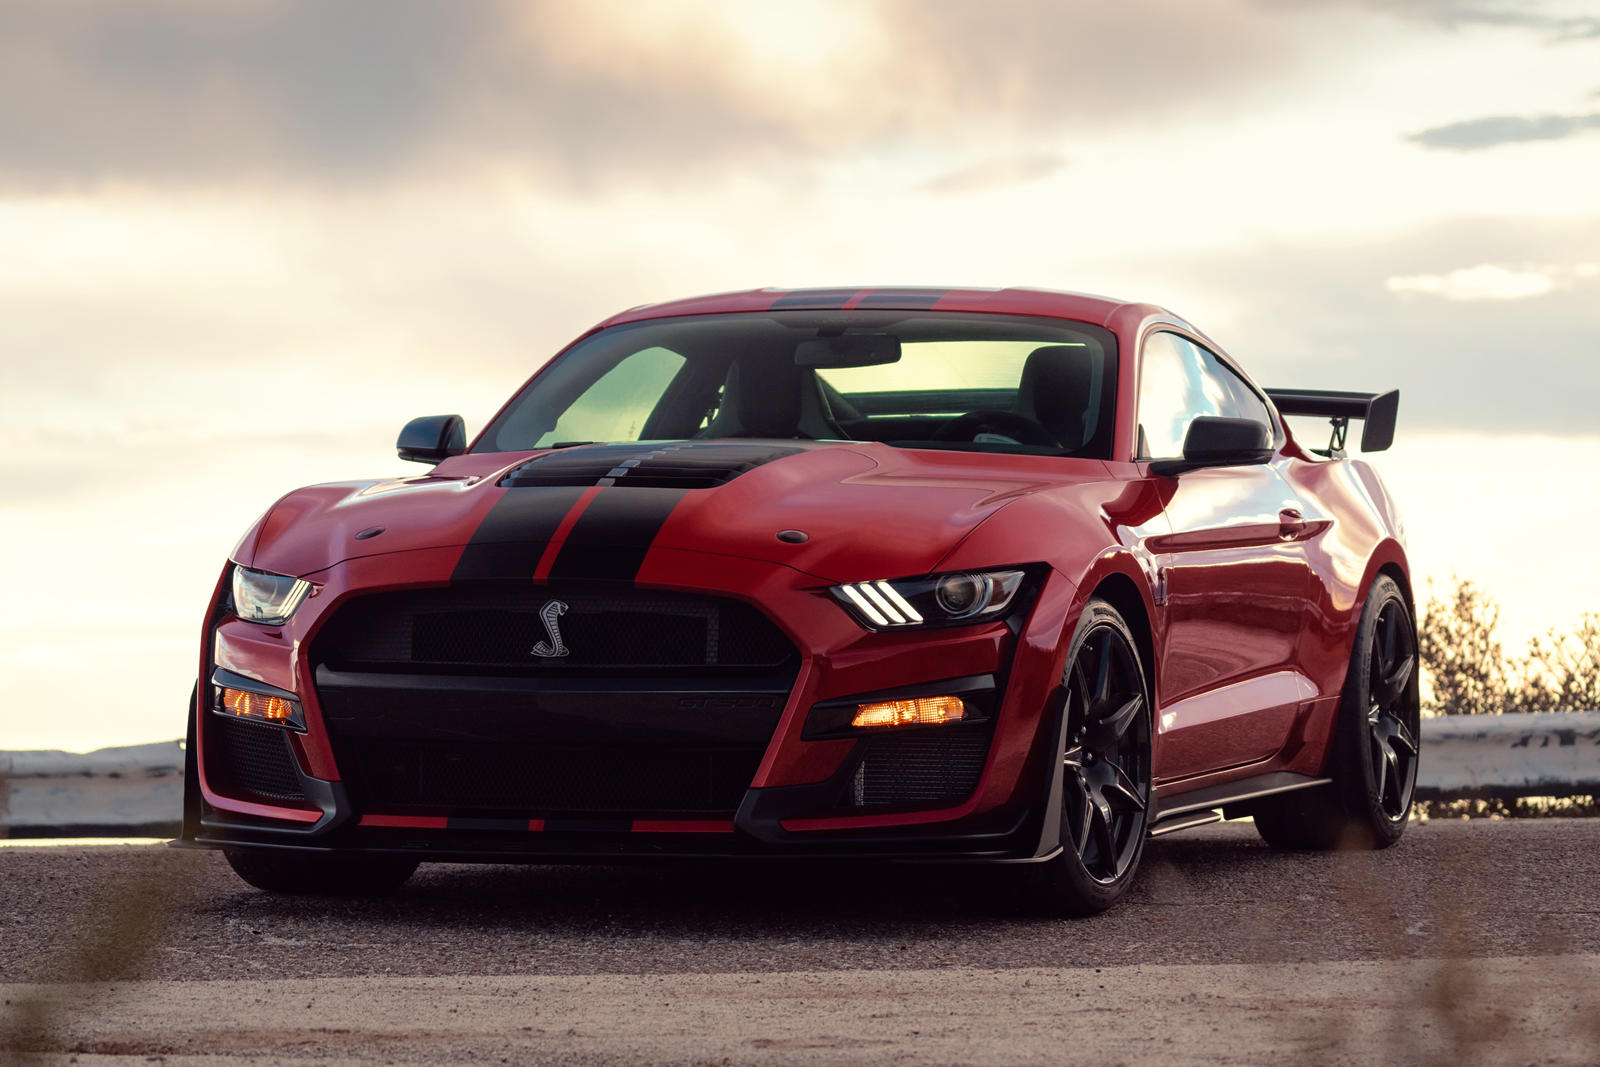 2022 Ford Mustang Shelby GT500 Colors & Dimensions: Width, Tires - Photos | CarBuzz